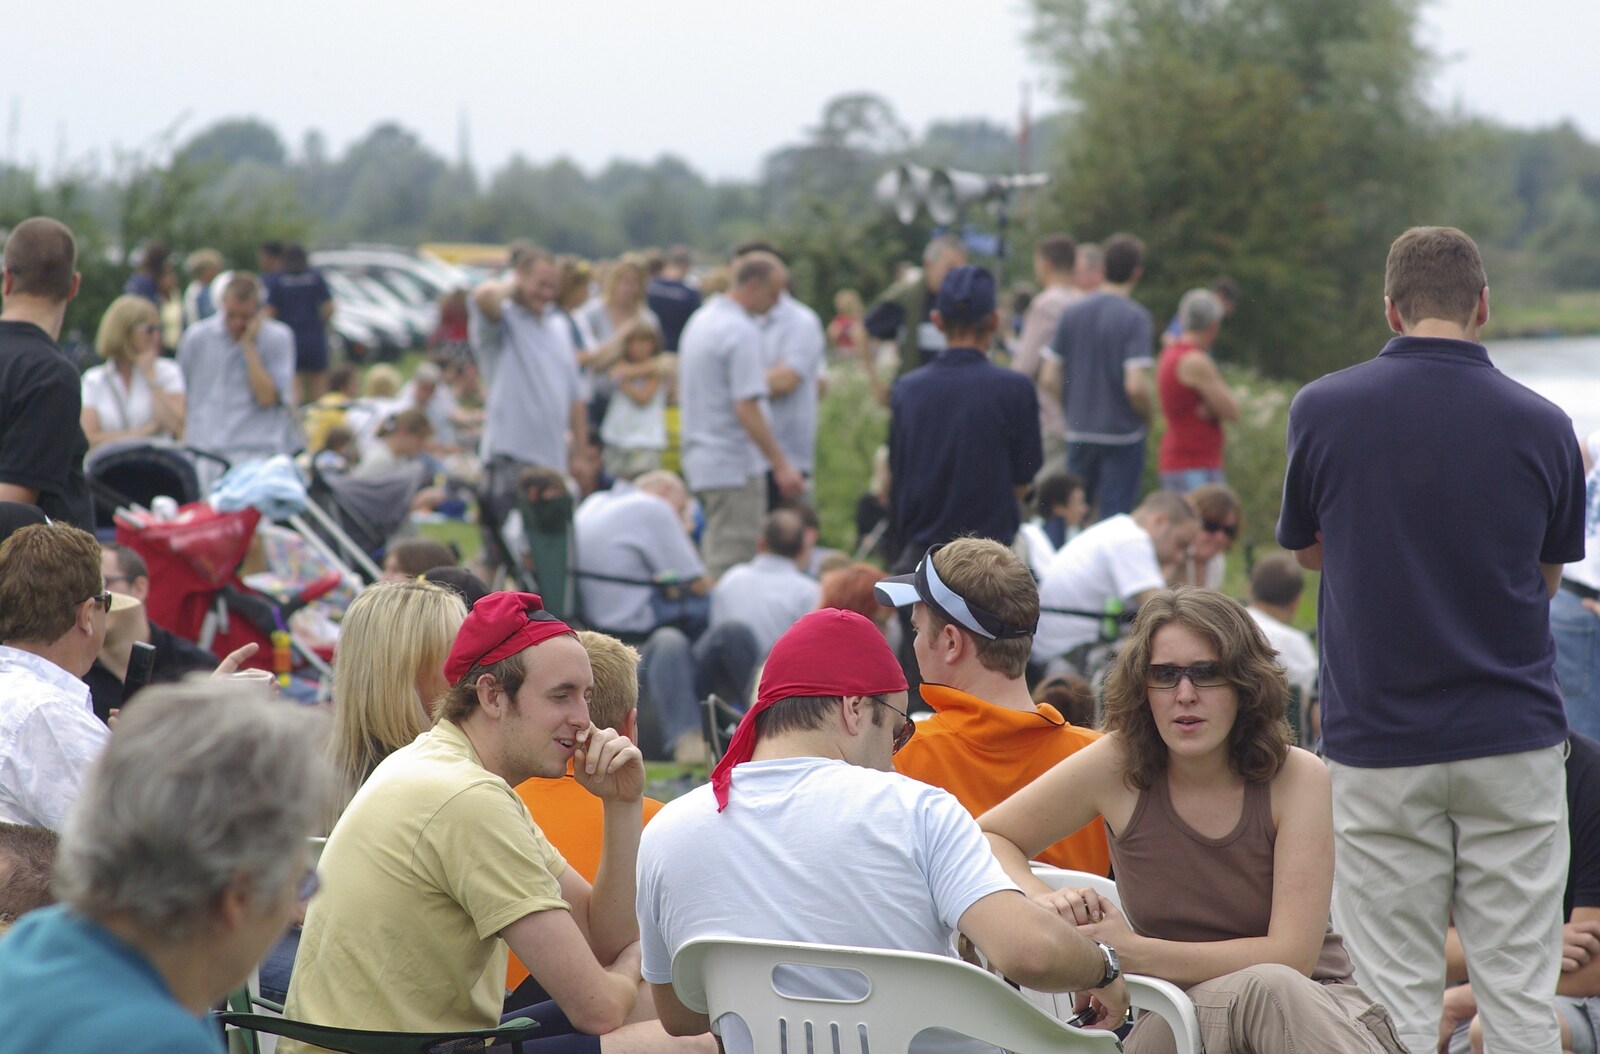 Qualcomm's Dragon-Boat Racing, Fen Ditton, Cambridge - 8th September 2007: The crowds wait for the next race